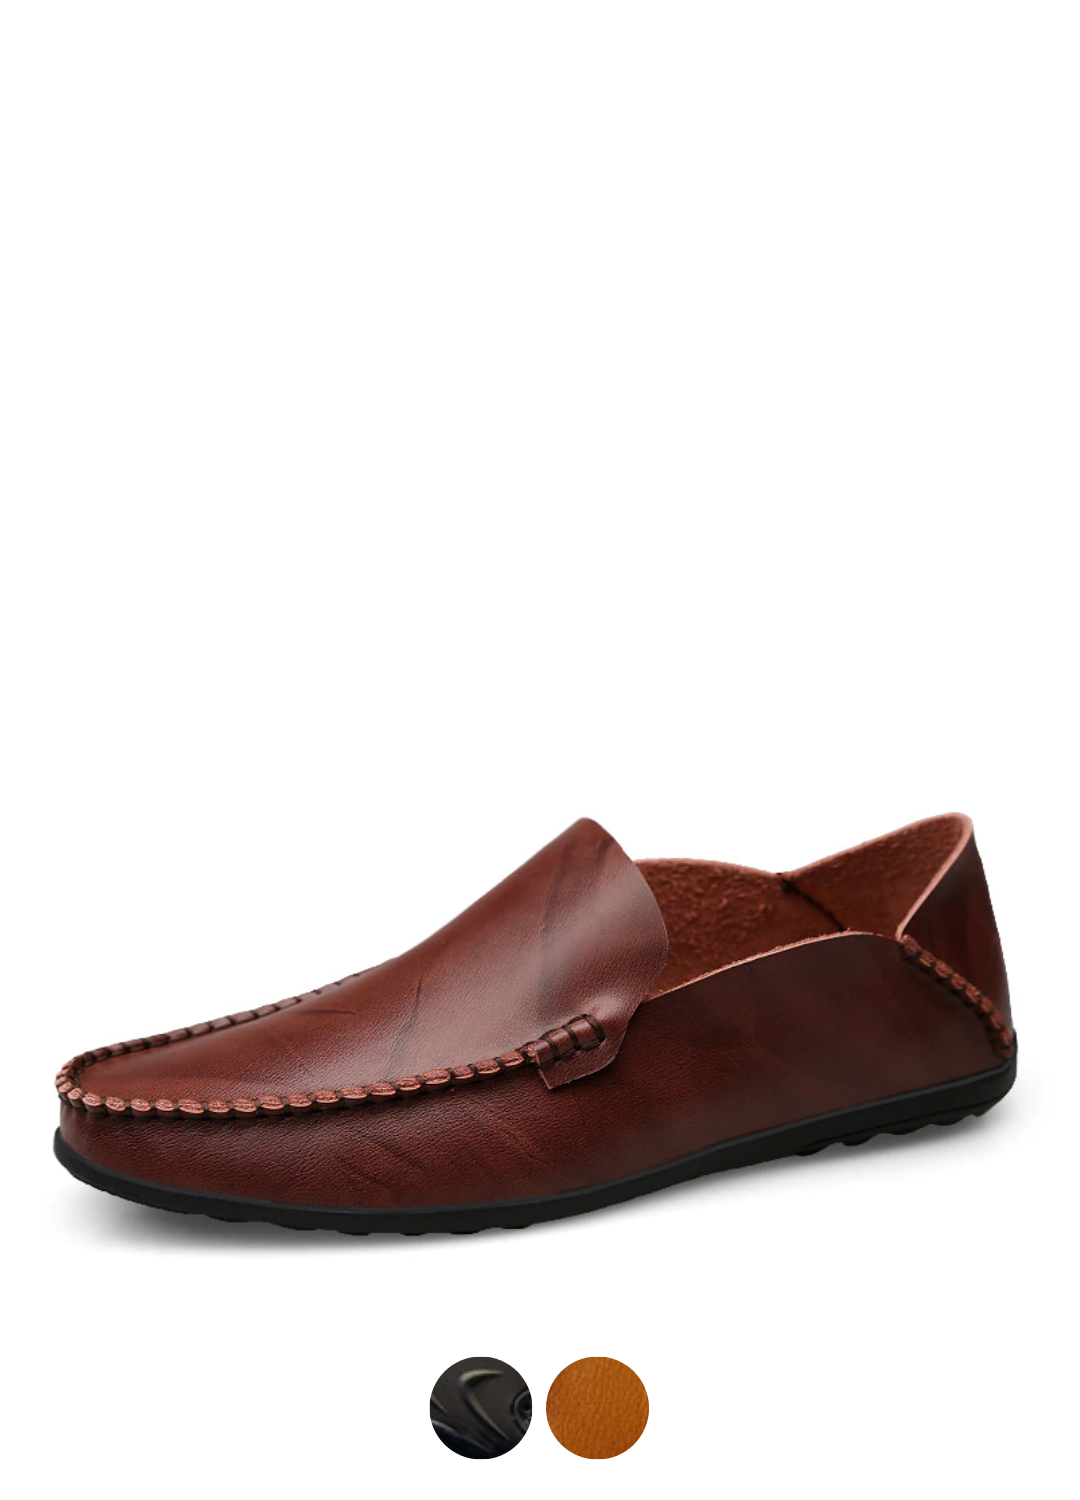 Harvey Men's Loafer Casual Shoes